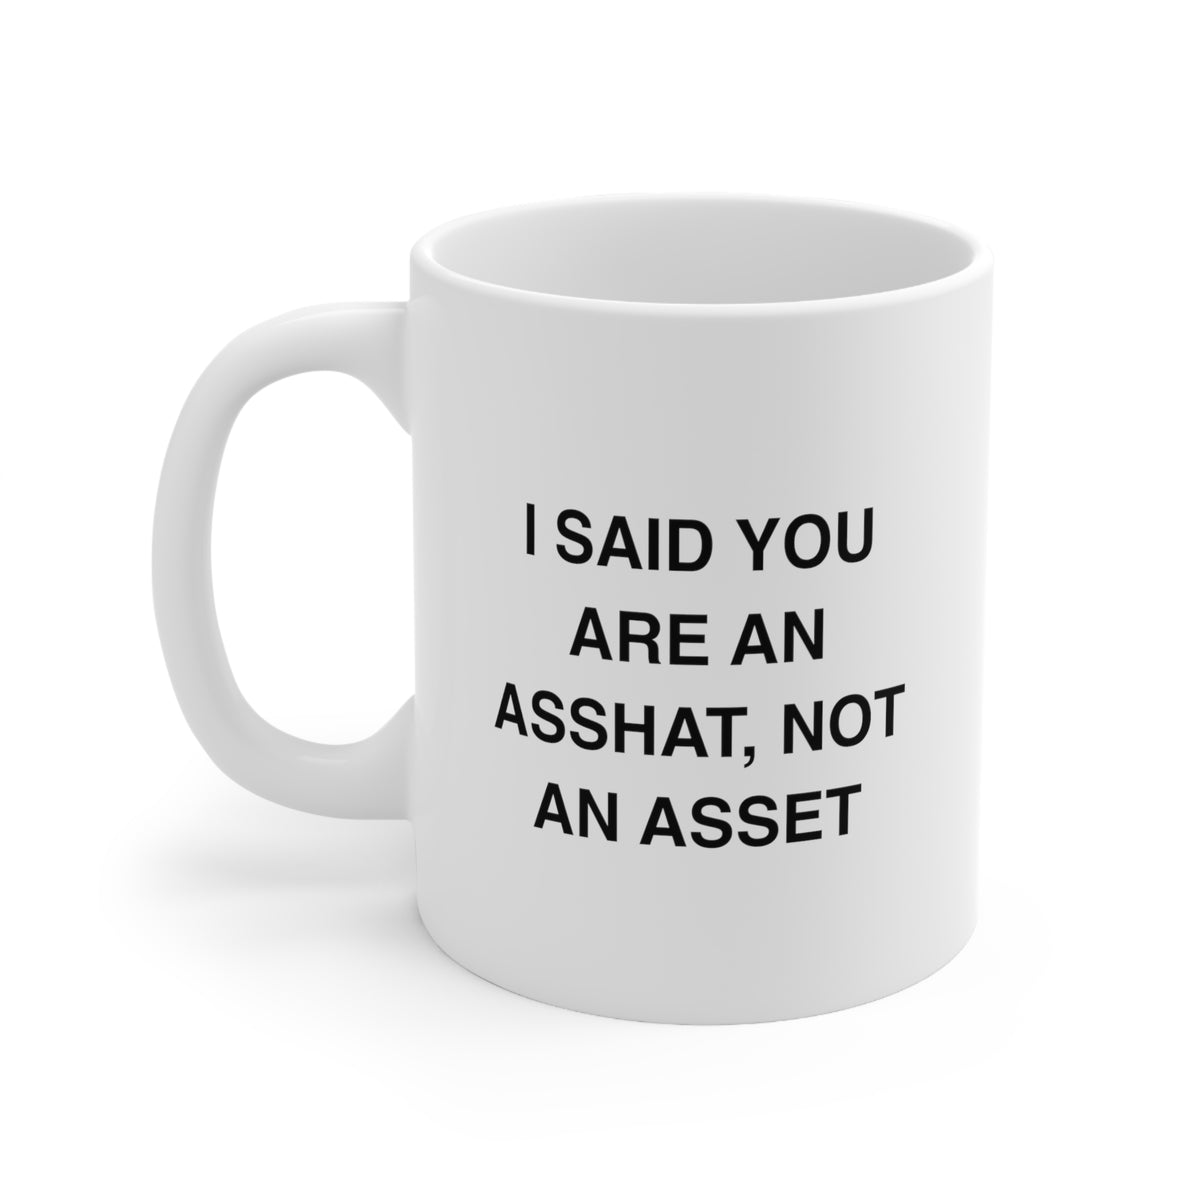 Funny Accountant Coffee Mug - I said you are an asshat, Not an asset - Tax Accounting Gifts For Men Women